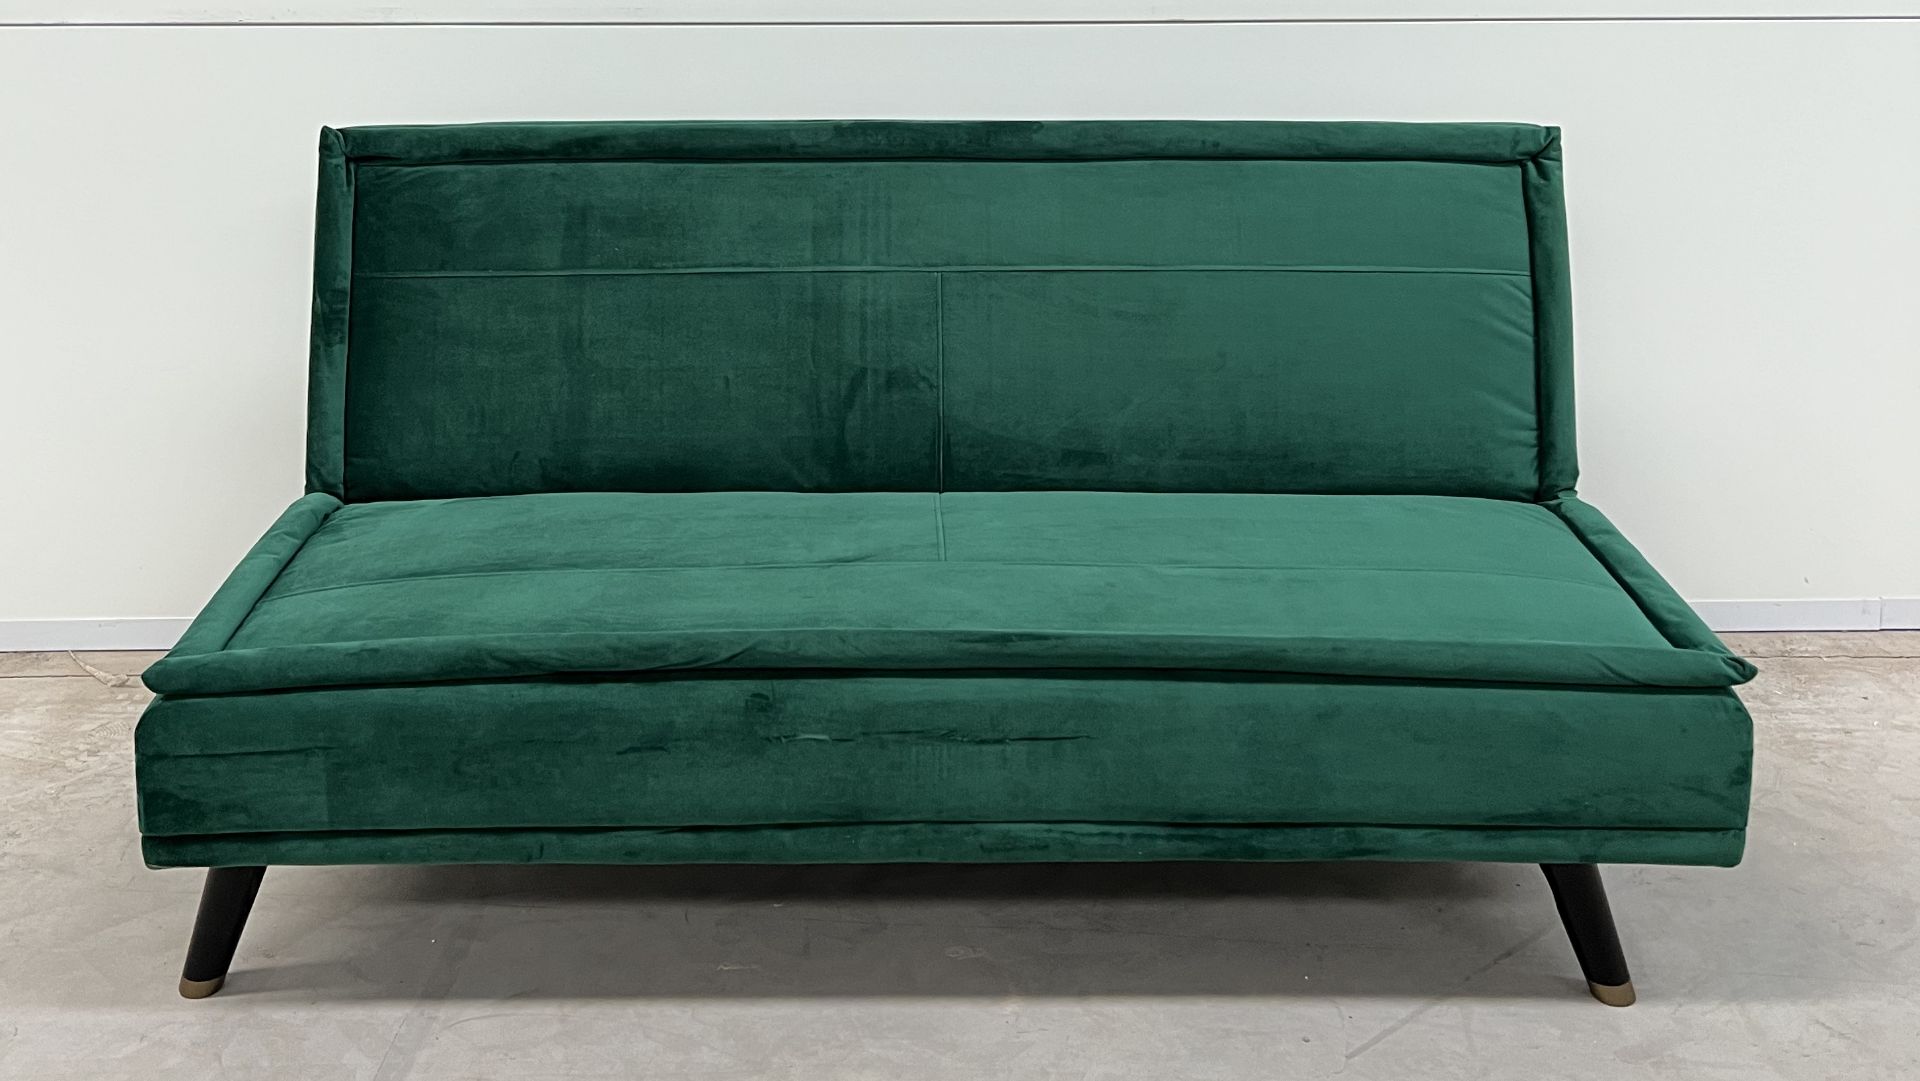 Green Velvet Upholstered Sofa Bed Is Ideal For Those Looking For A Sleek Space-Saving Design. In A